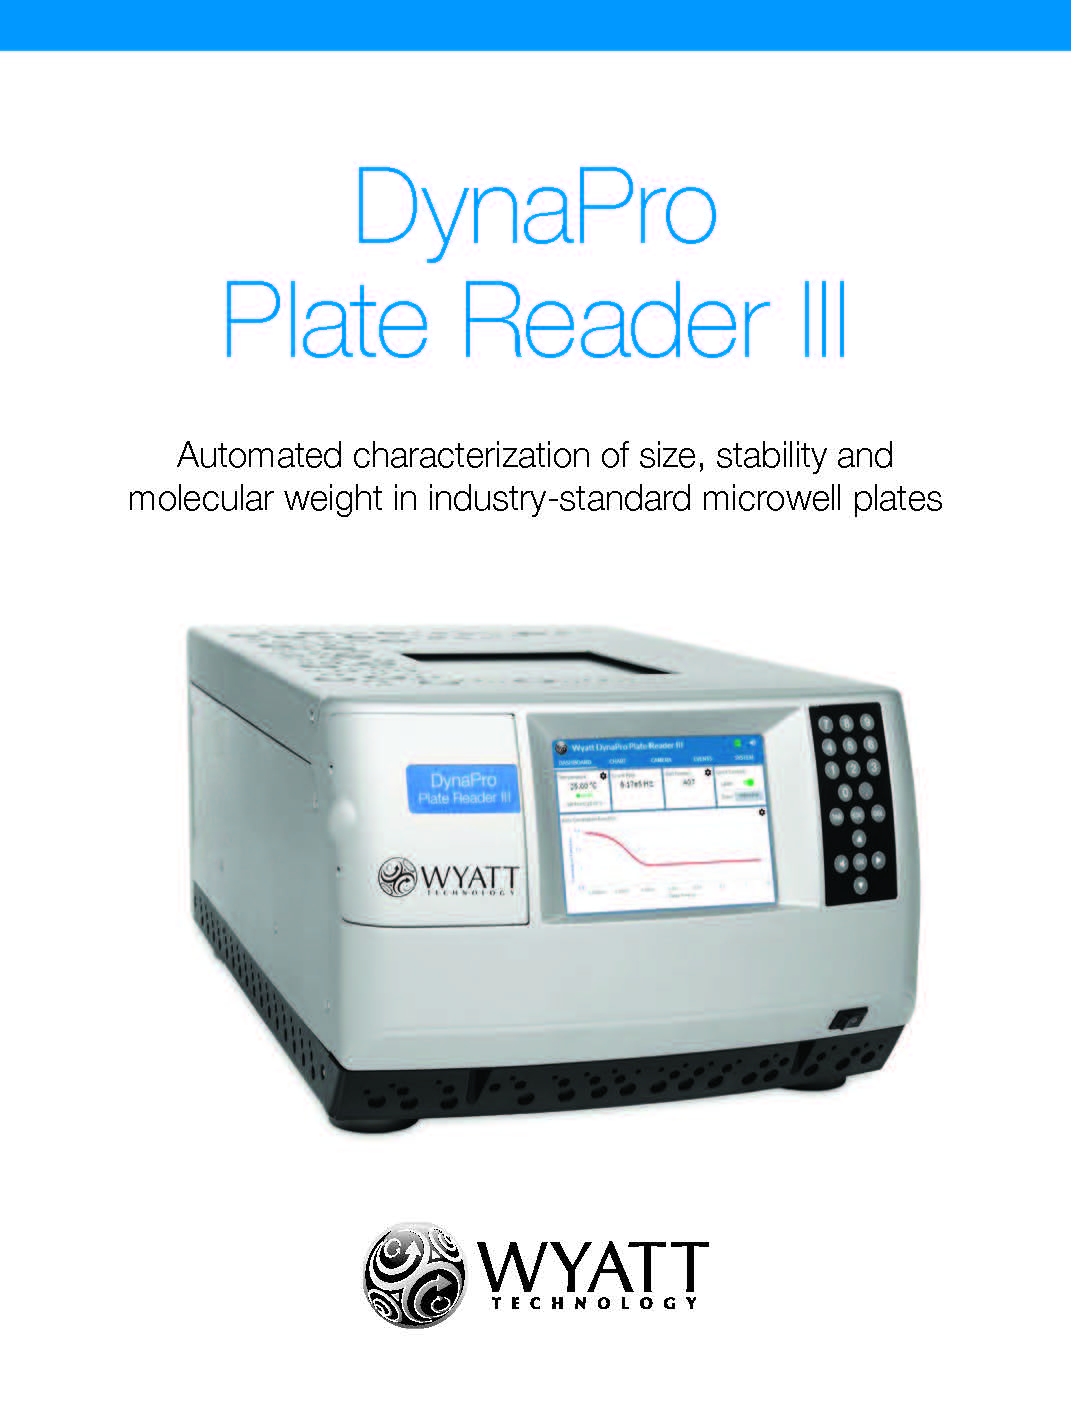 DynaPro-Plate-Reader-III-Product-Brochure-W3400D_Page_1